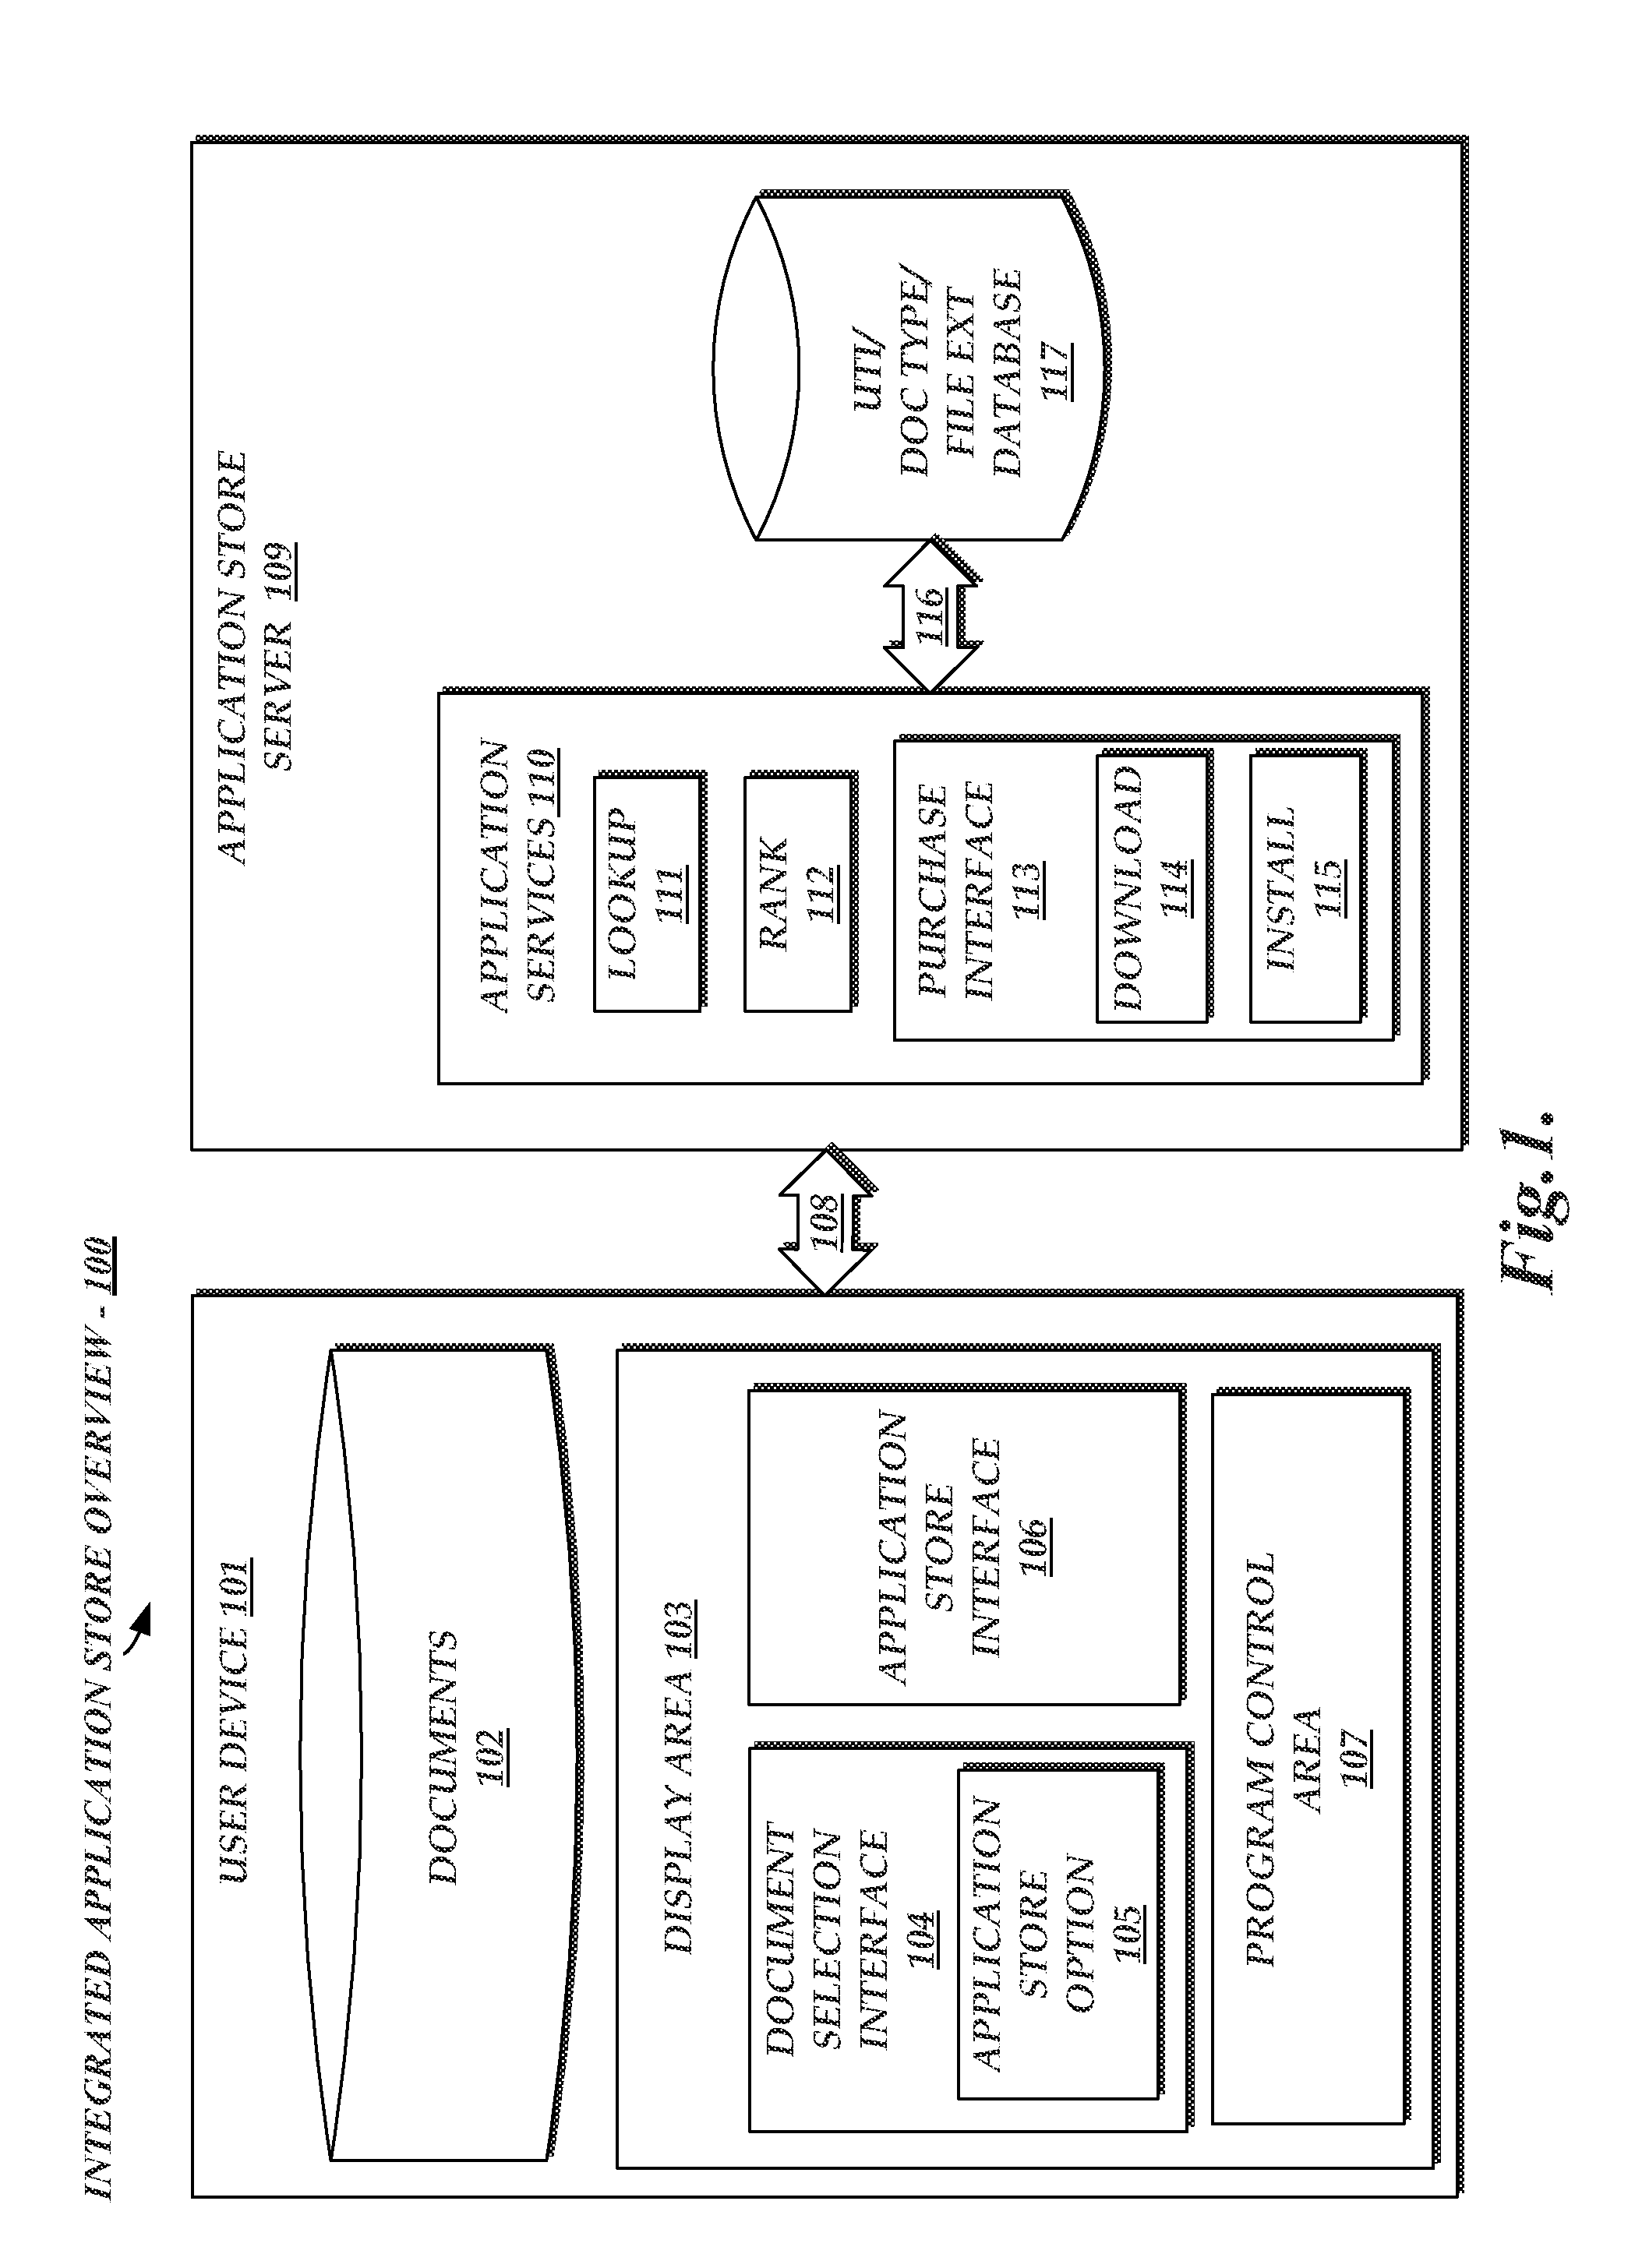 Integrated application store for a user device